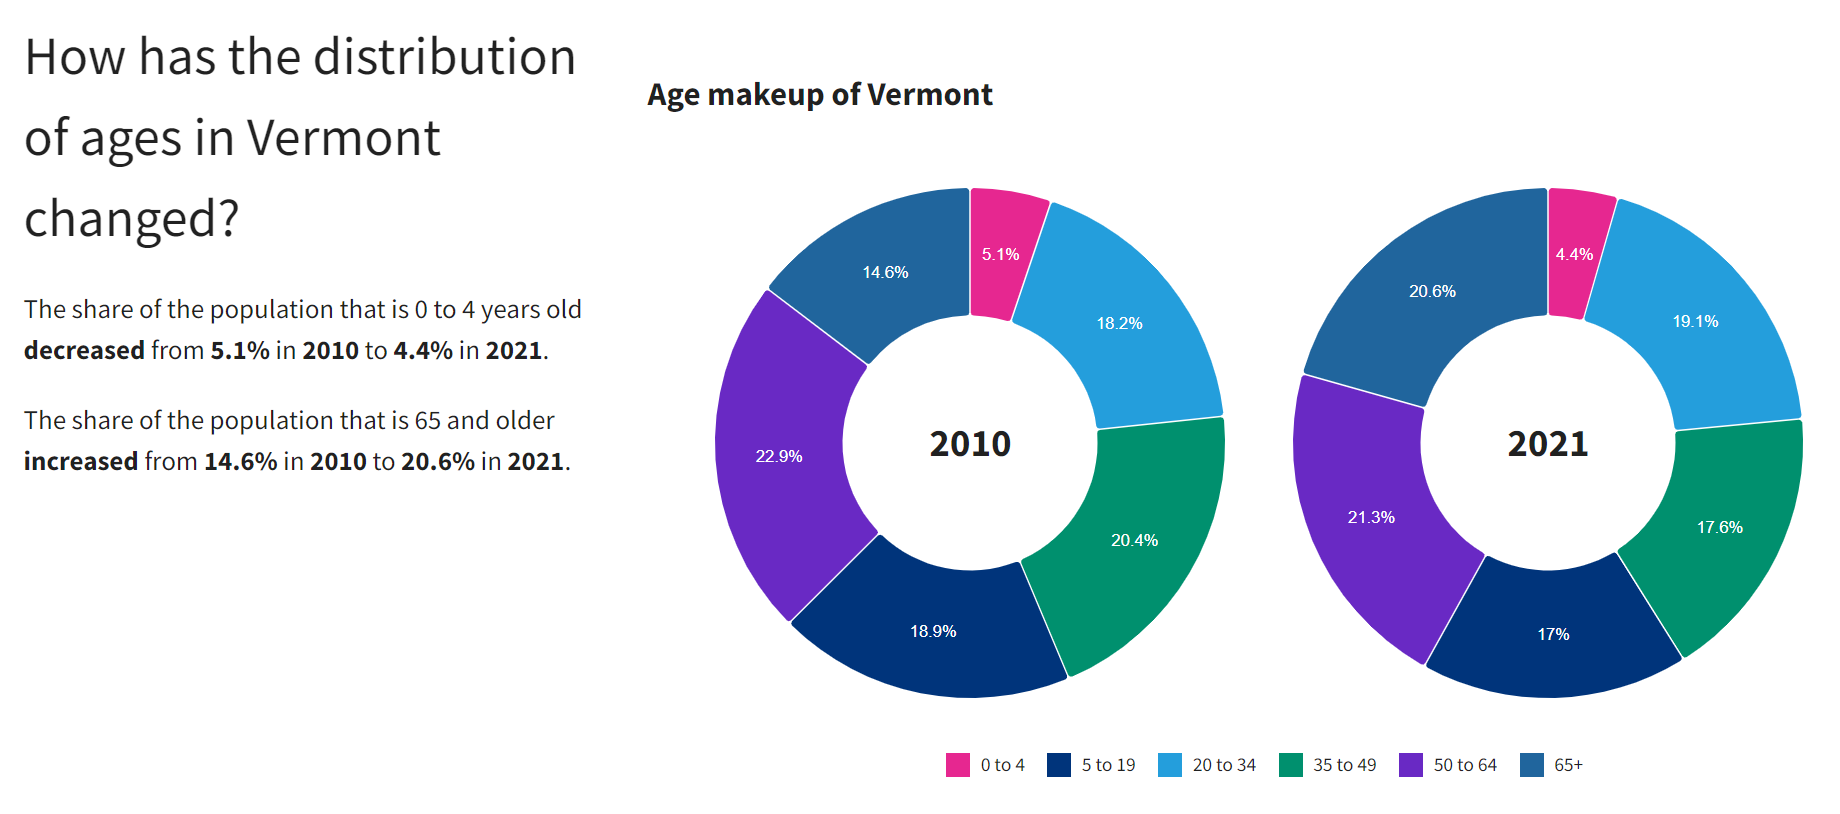 Pie charts showing the age composition of Vermont in 2010 vs. 2021